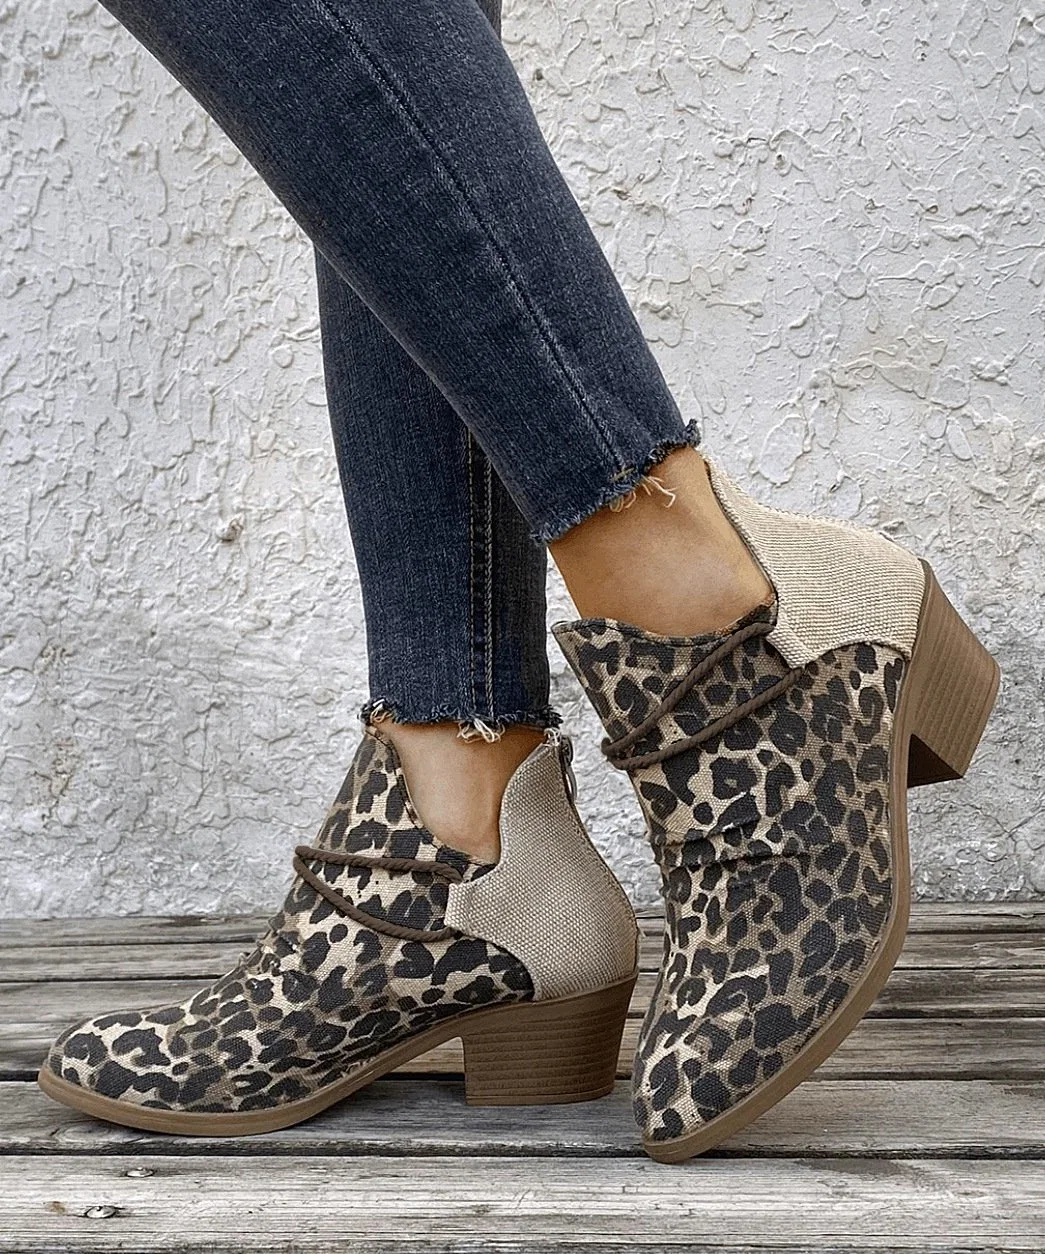 OEM Western Fashion Shoes Dear-Lover Leopard Retro Canvas Patchwork Chunky Heel Boots for Women